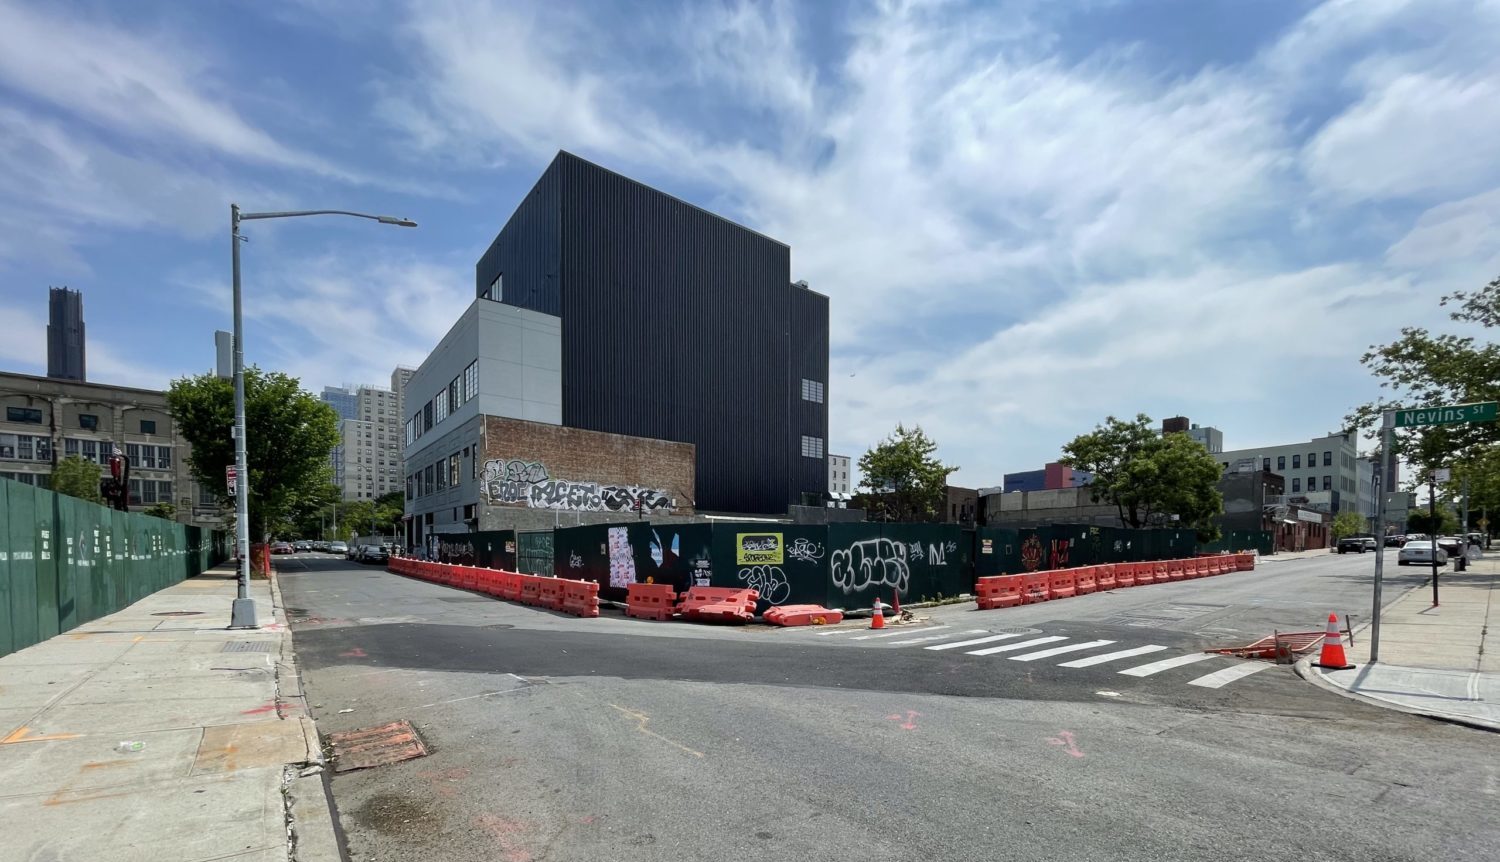 239 Nevins Street Cleared for Excavation in Gowanus, Brooklyn